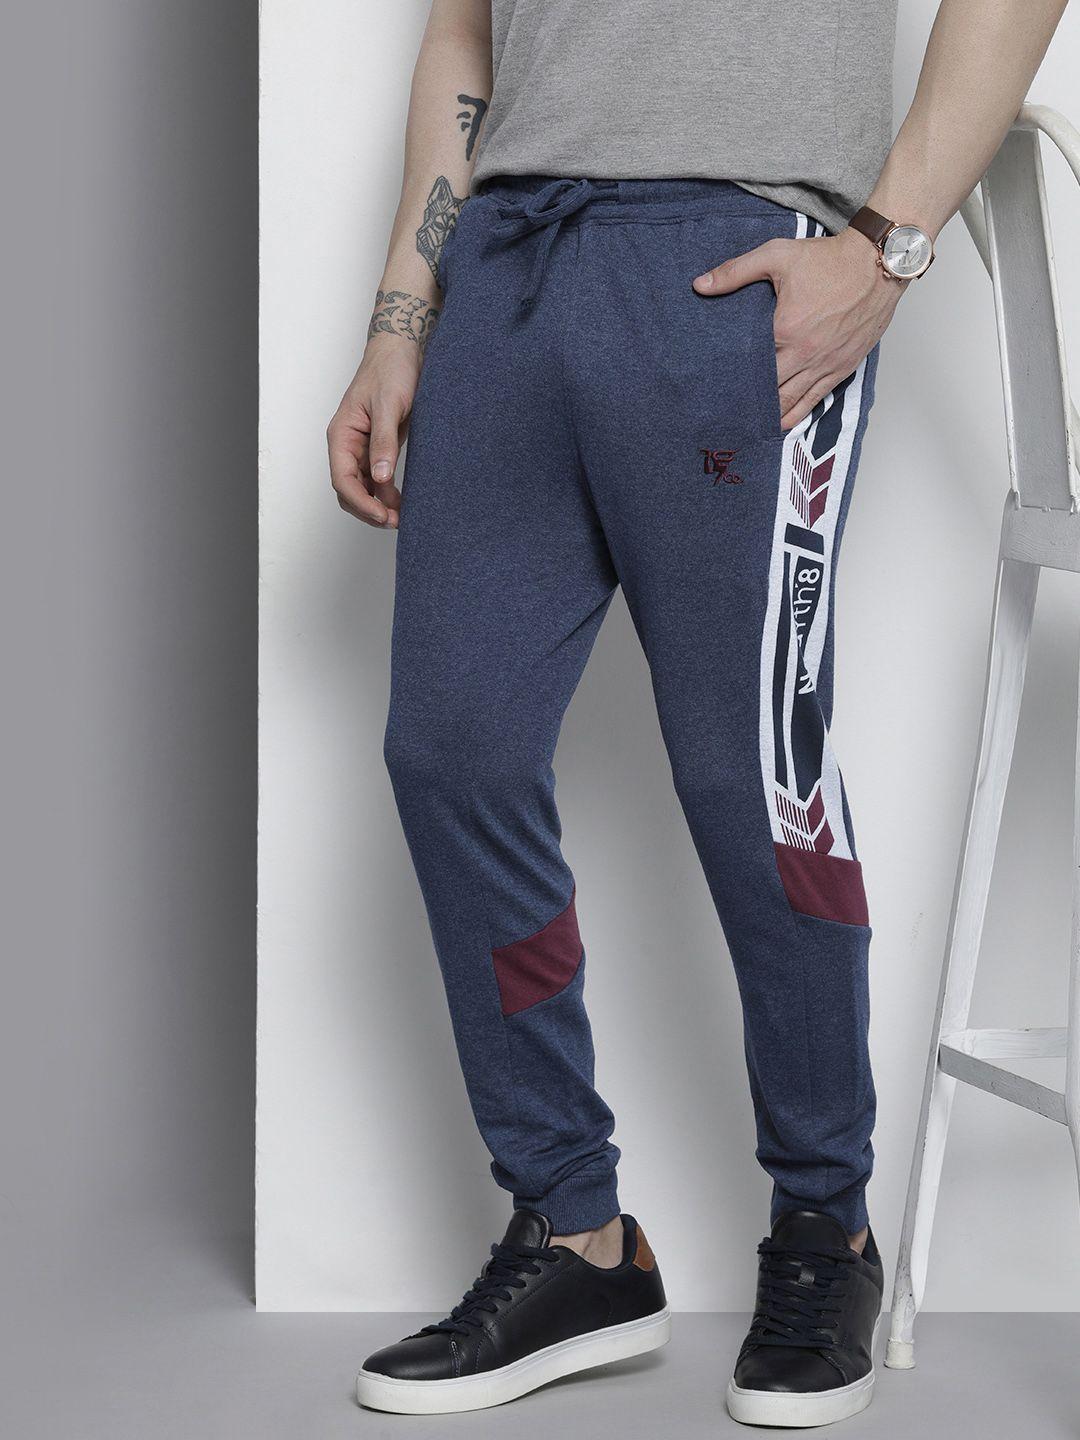 the indian garage co men navy blue & white printed jogger